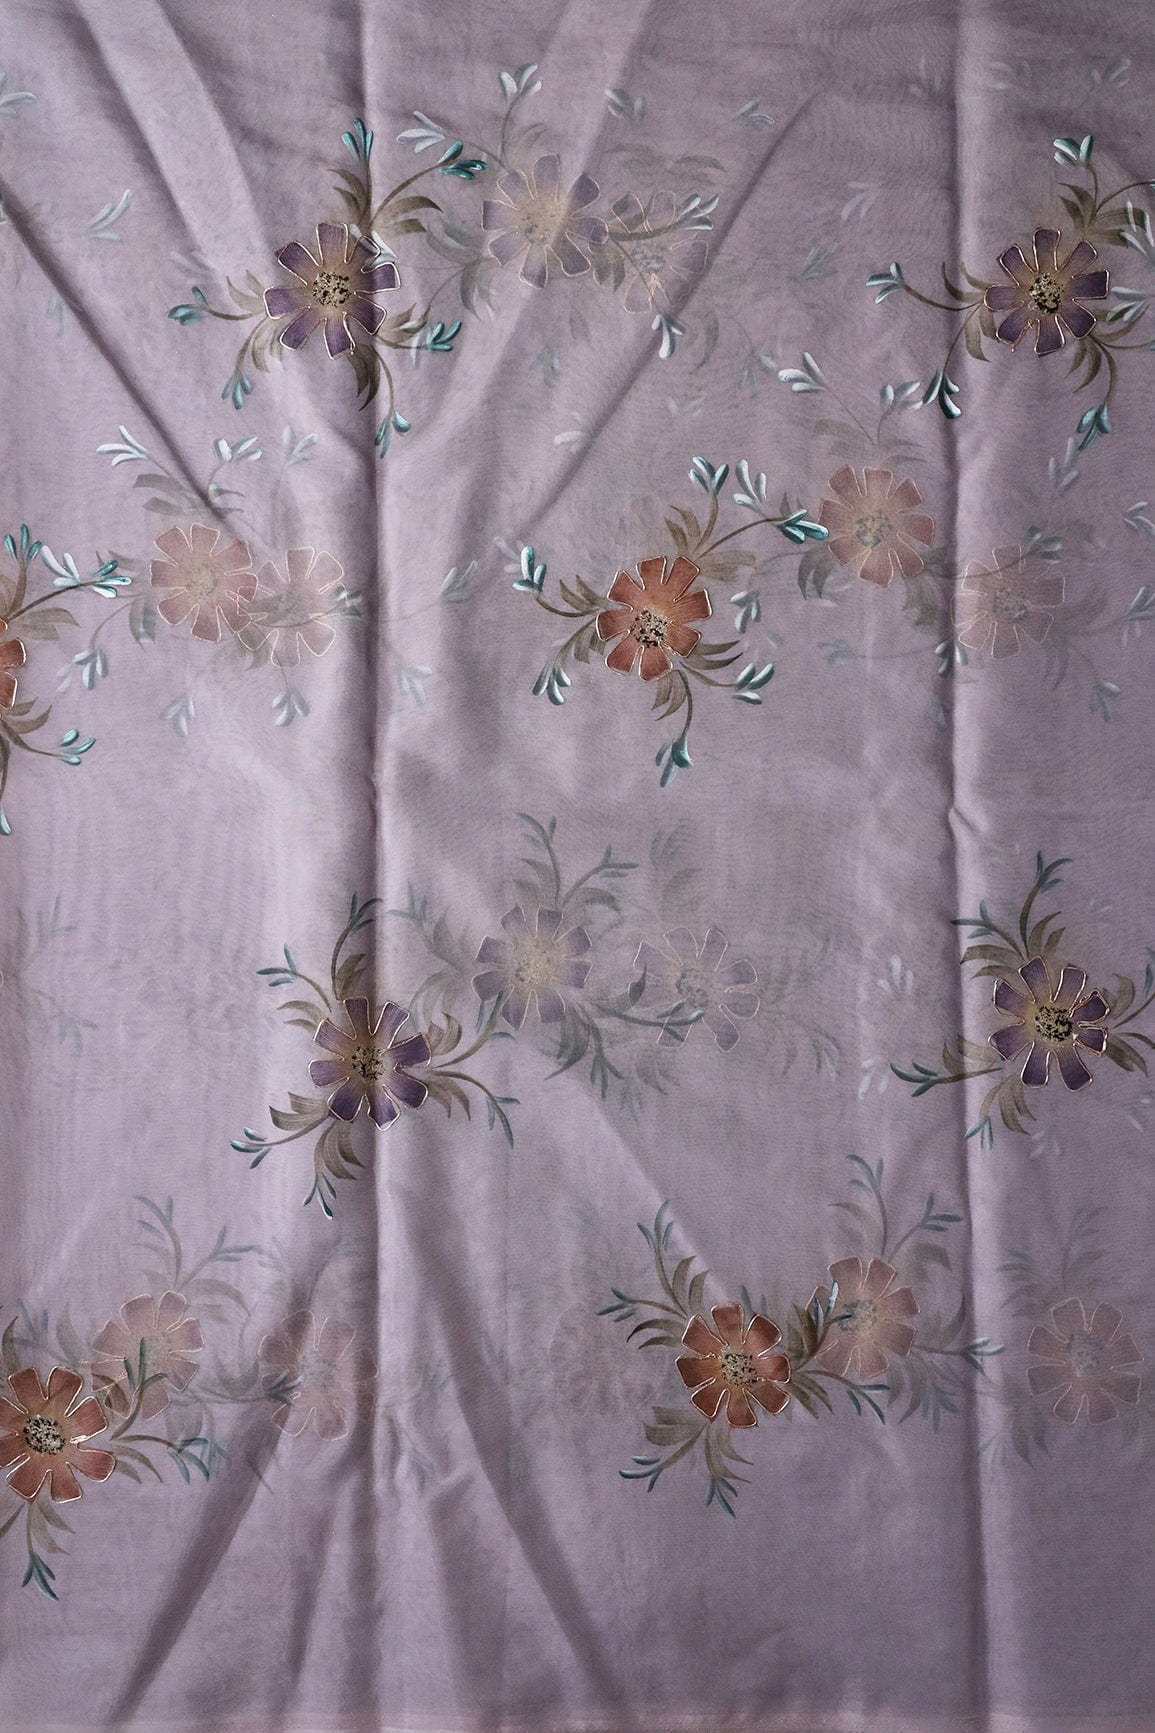 doeraa Embroidery Fabrics Gorgeouse Floral Hand Painted With Embroidery Work On Dusty Lavender Organza Fabric